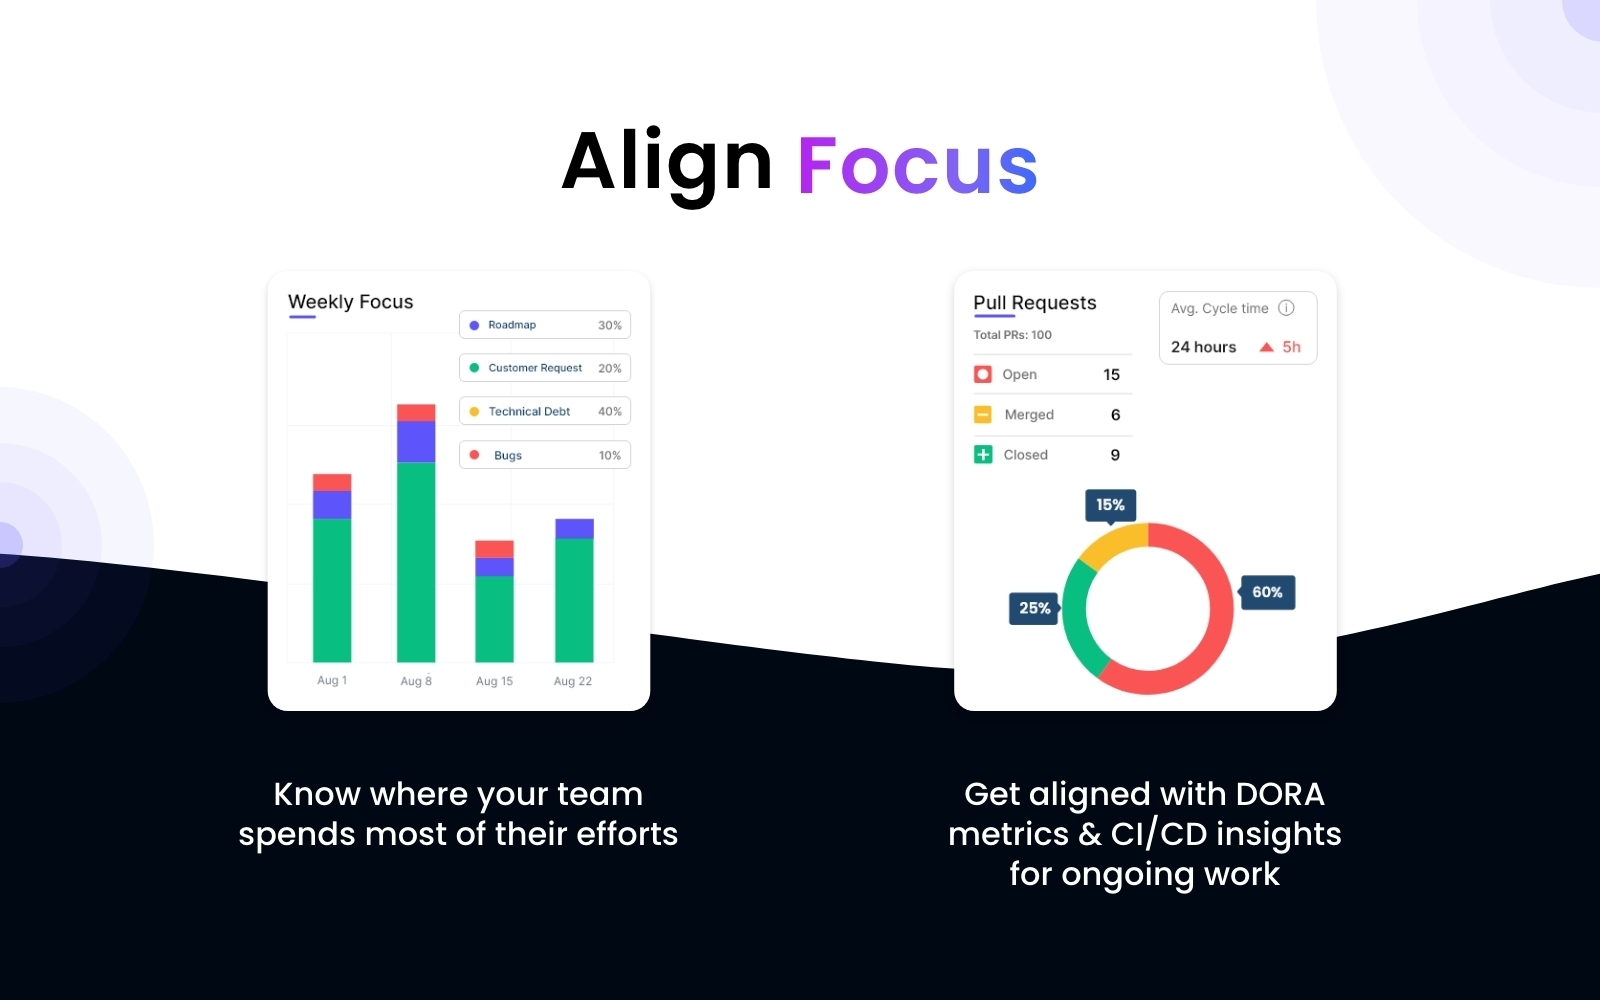 See where your teams spend most their efforts & align focus on what matters